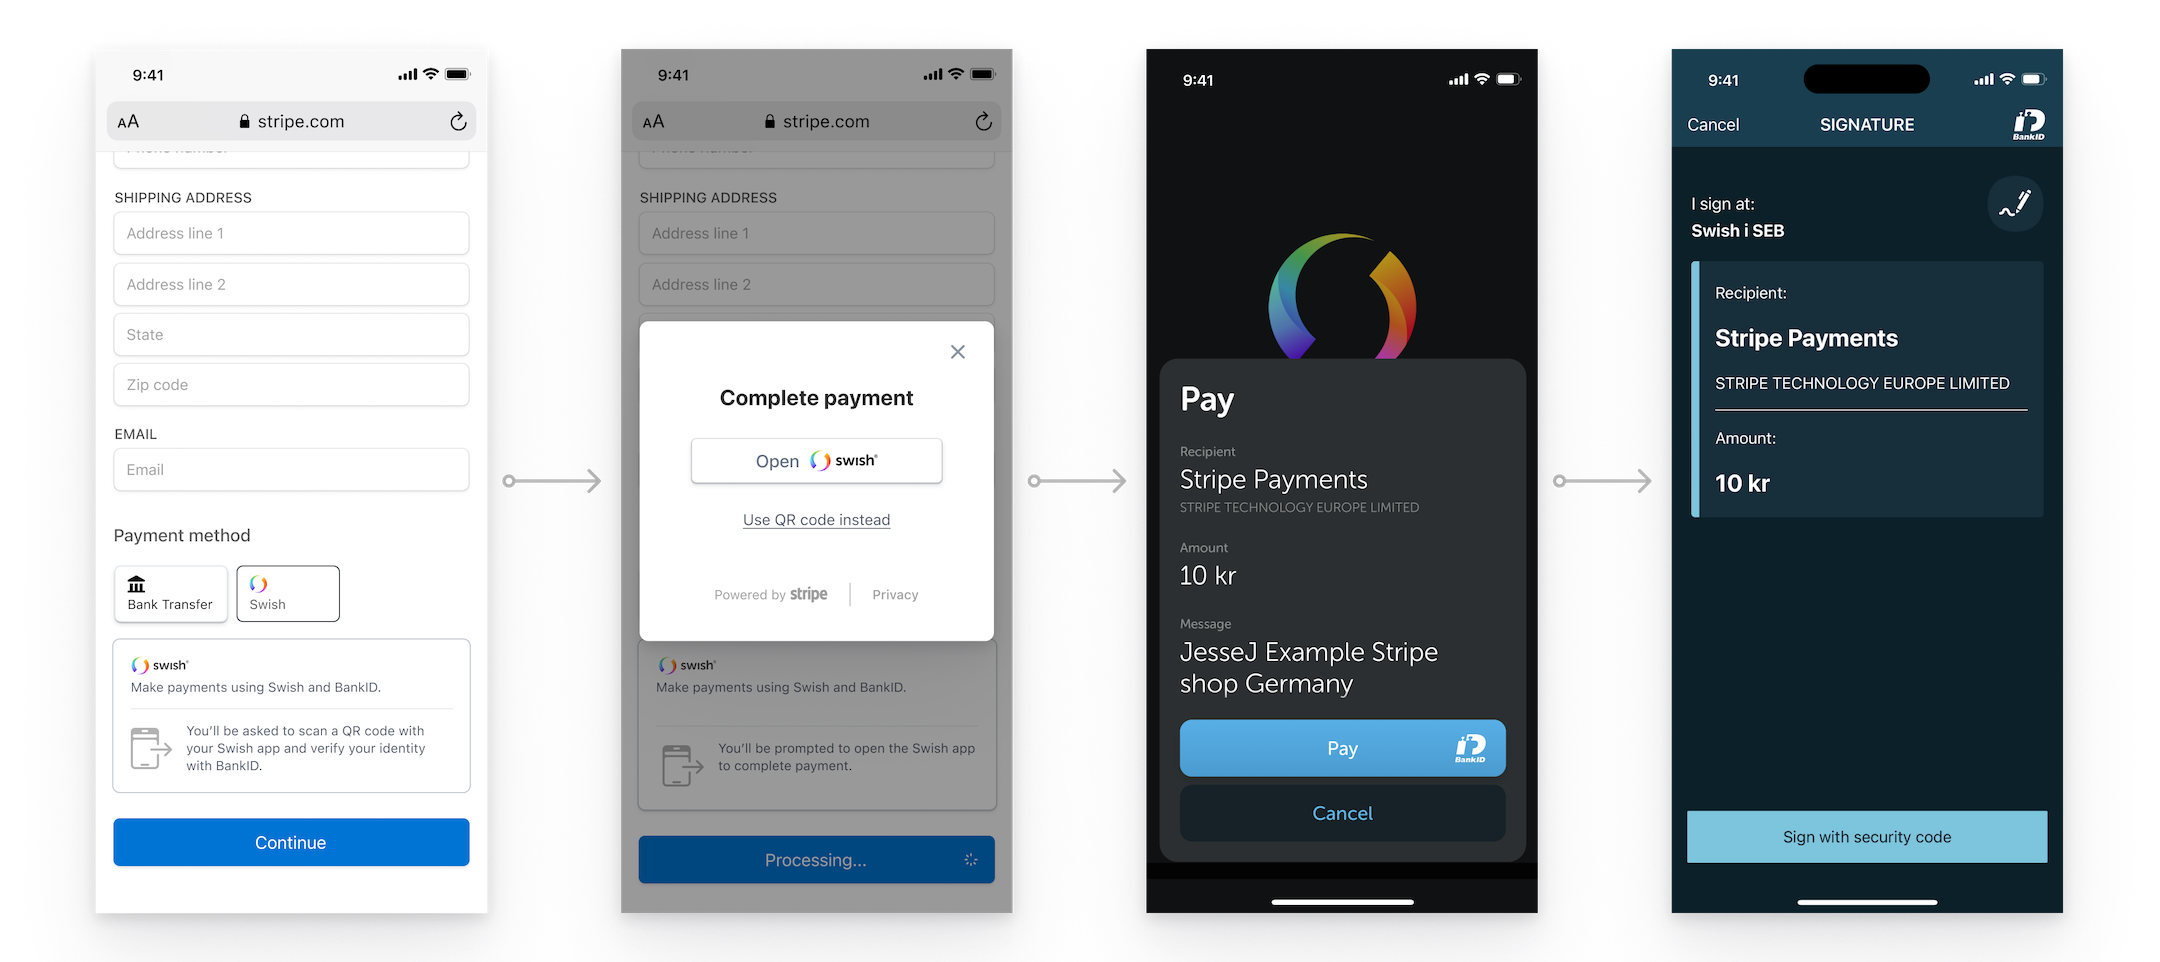 The customer follows a mobile redirect flow to pay with Swish.